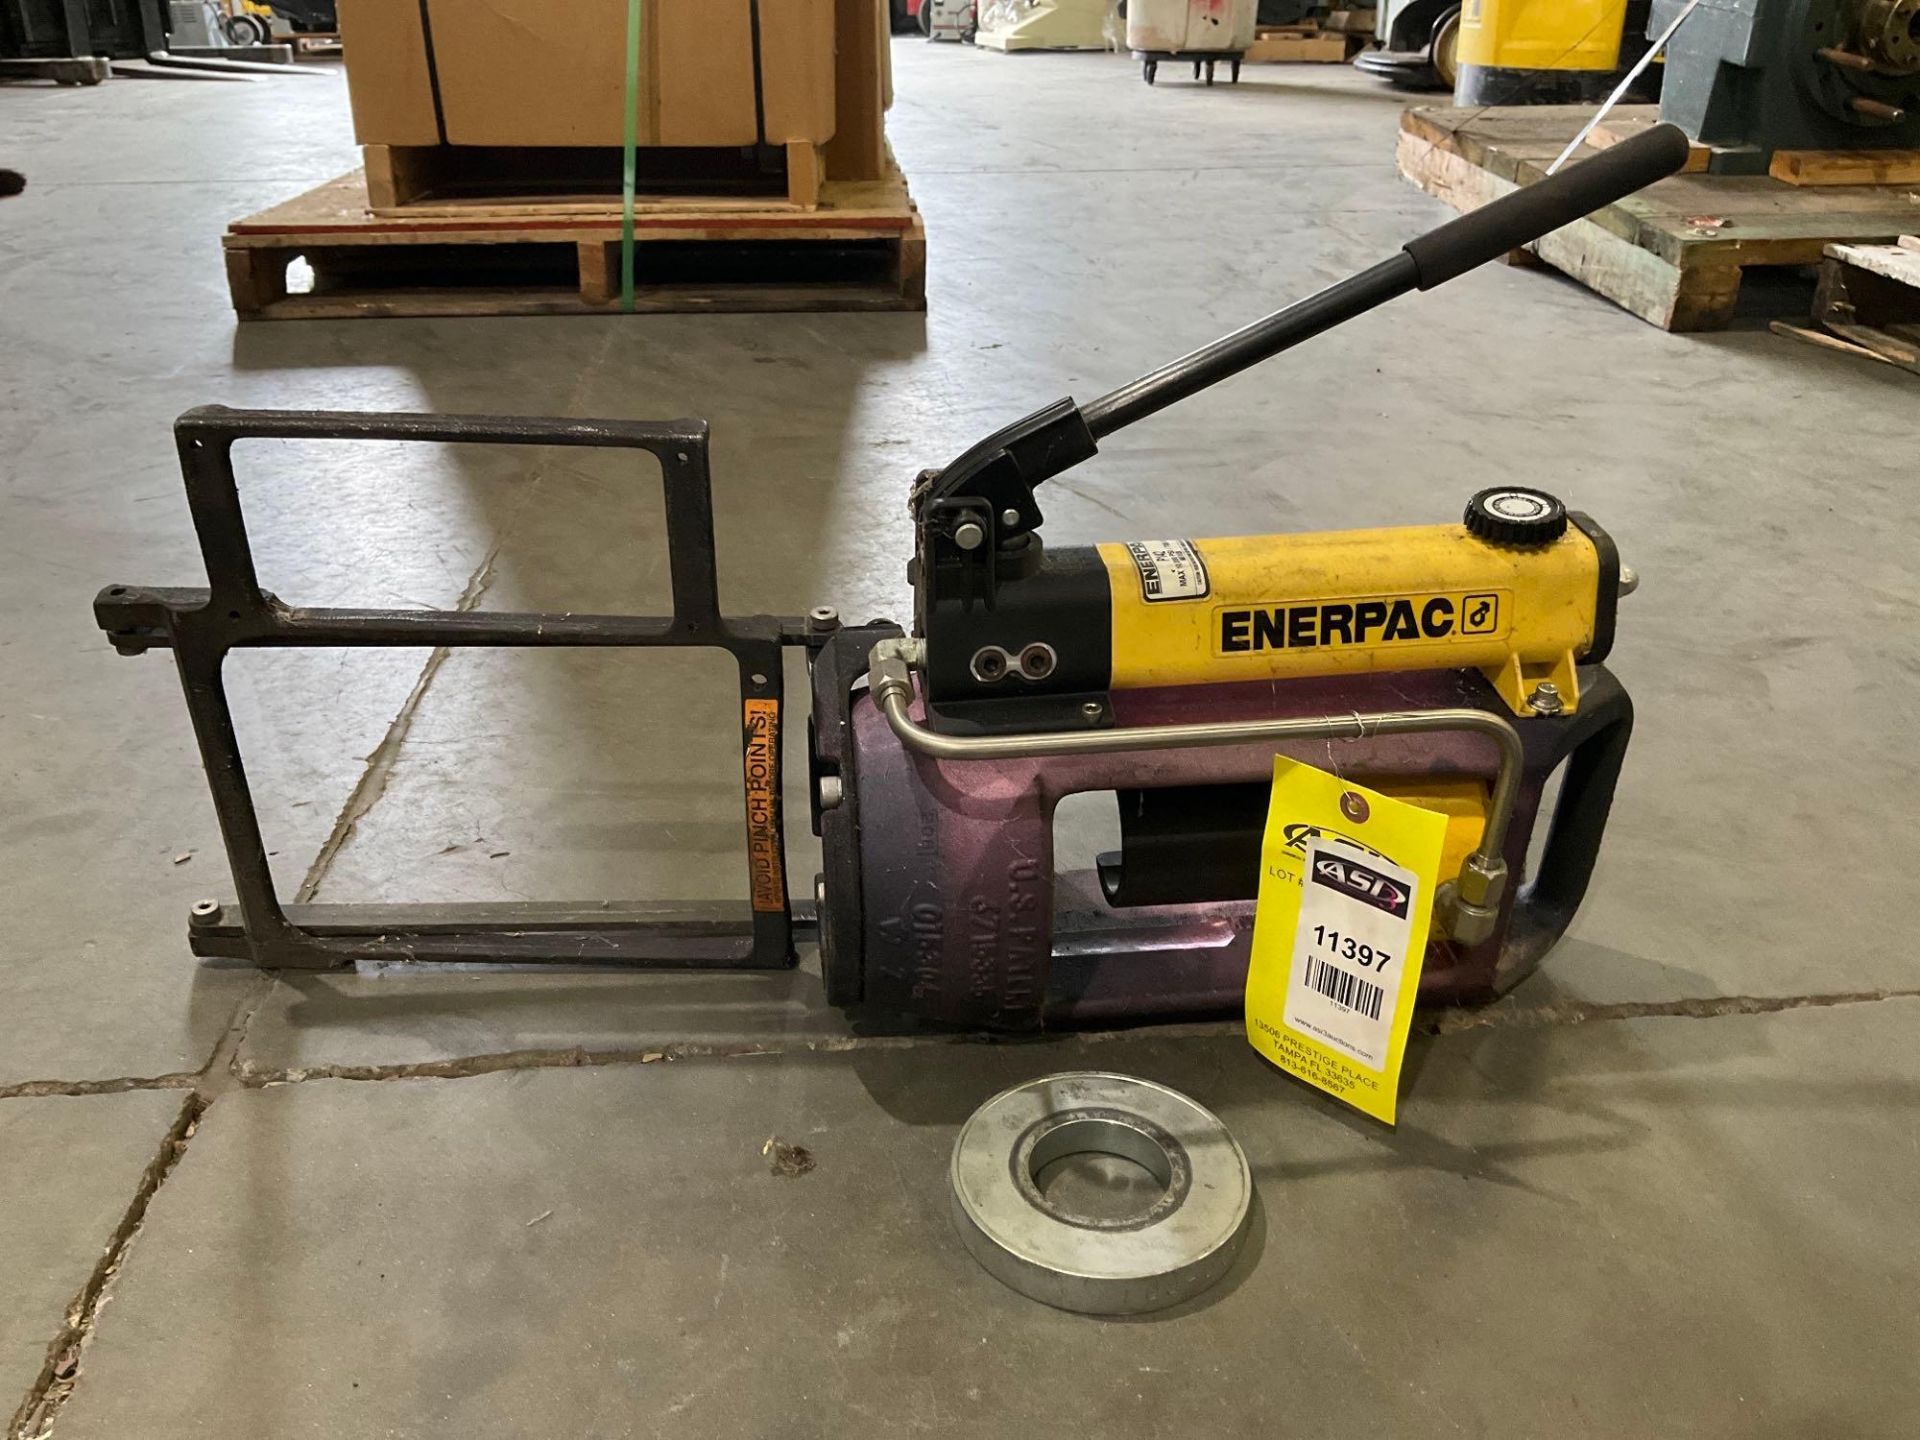 ENERPAC HYDRAULIC HAND PUMP MODEL P142, APPROX MAX PSI 10,000, APPROX 700 BAR - Image 5 of 8